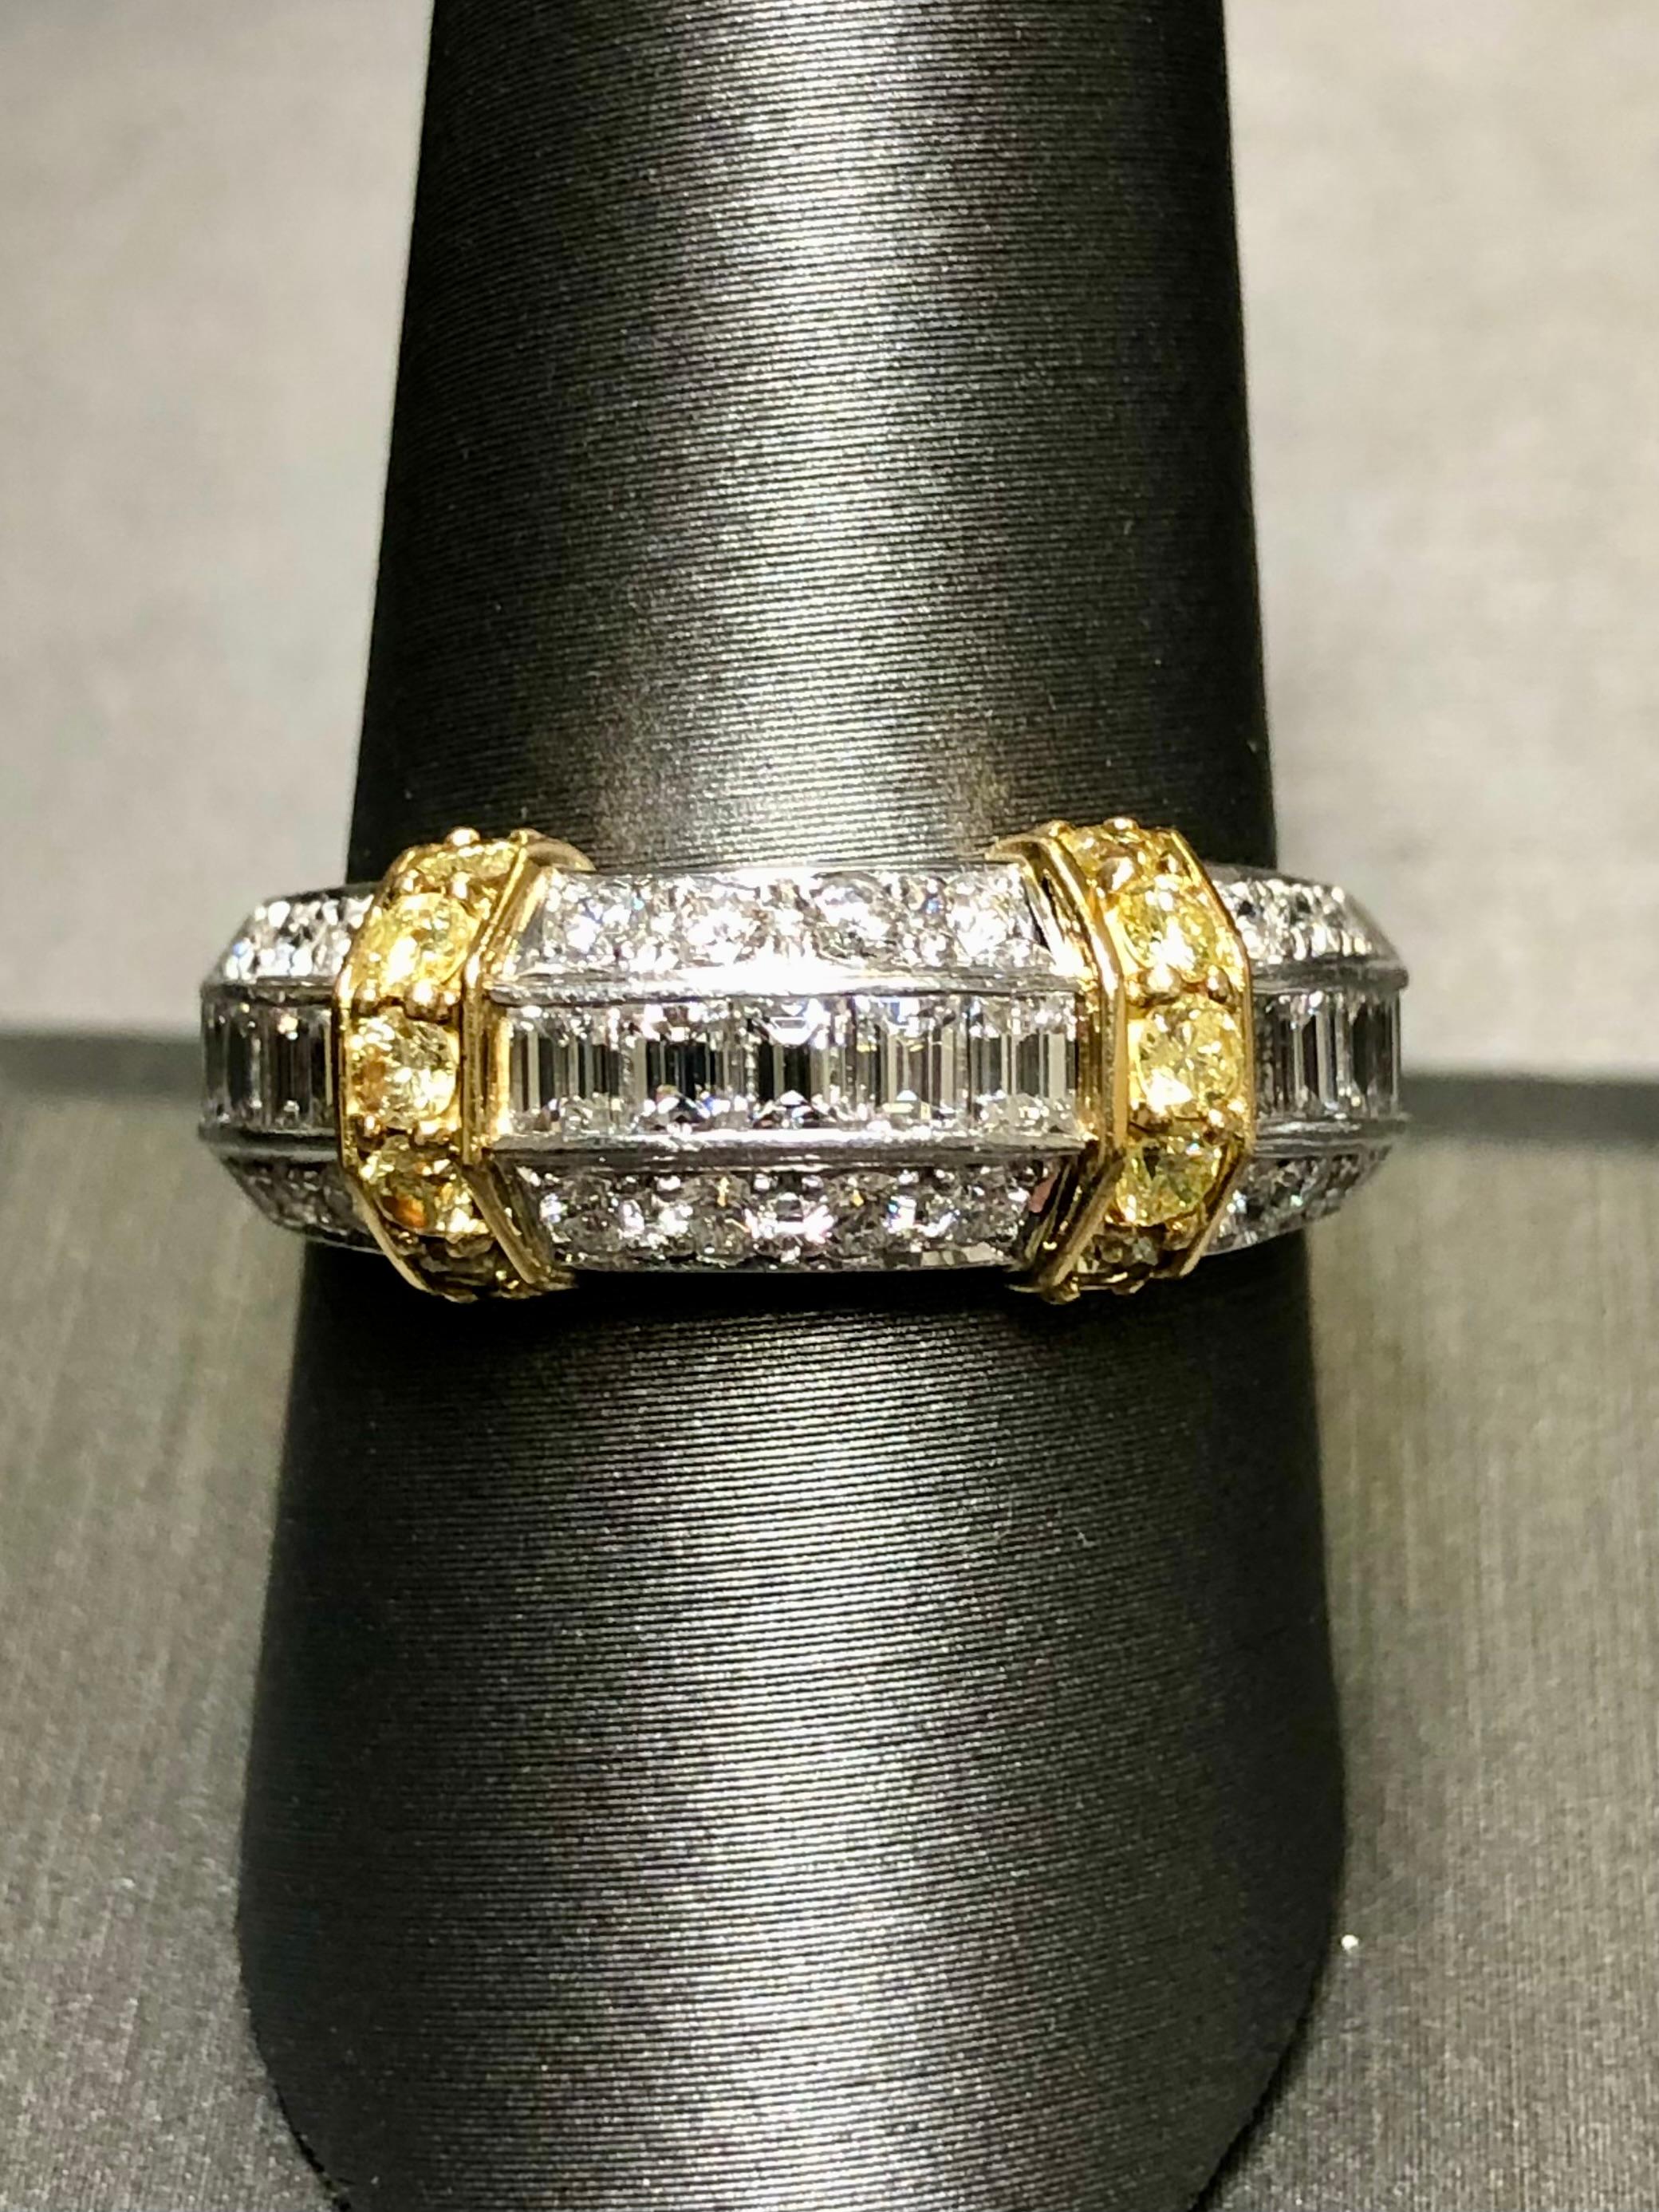 Gorgeous in its simplicity, this ring is done in platinum with 18K yellow gold accents and channel/bead set with approximately 1.51cttw in G-H color Vs1 clarity round and wide baguette diamonds along with fancy yellow (we believe untreated) round